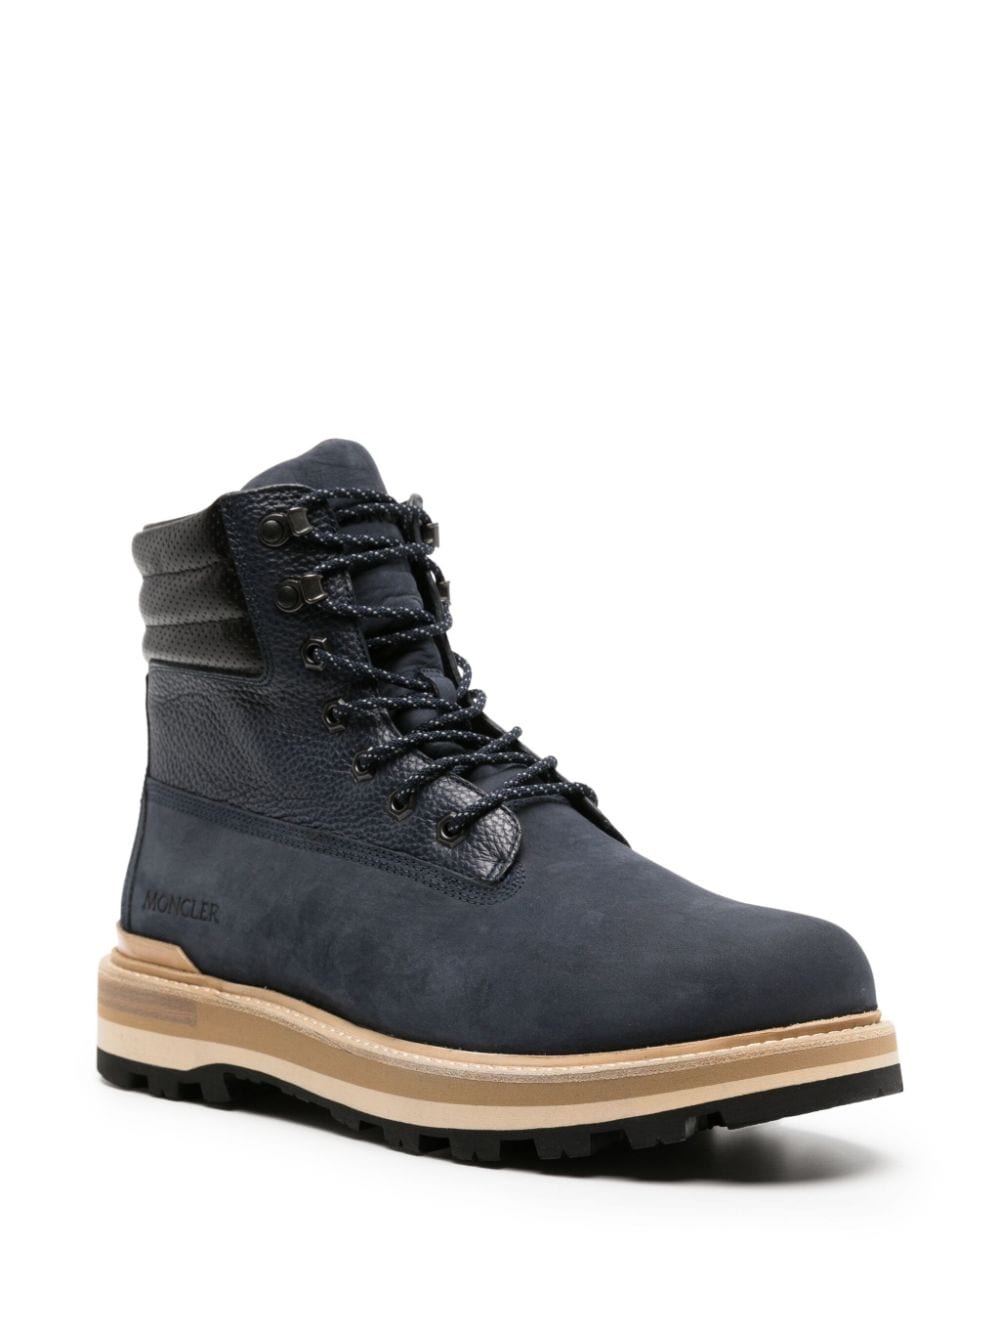 Peka suede hiking boots - 2